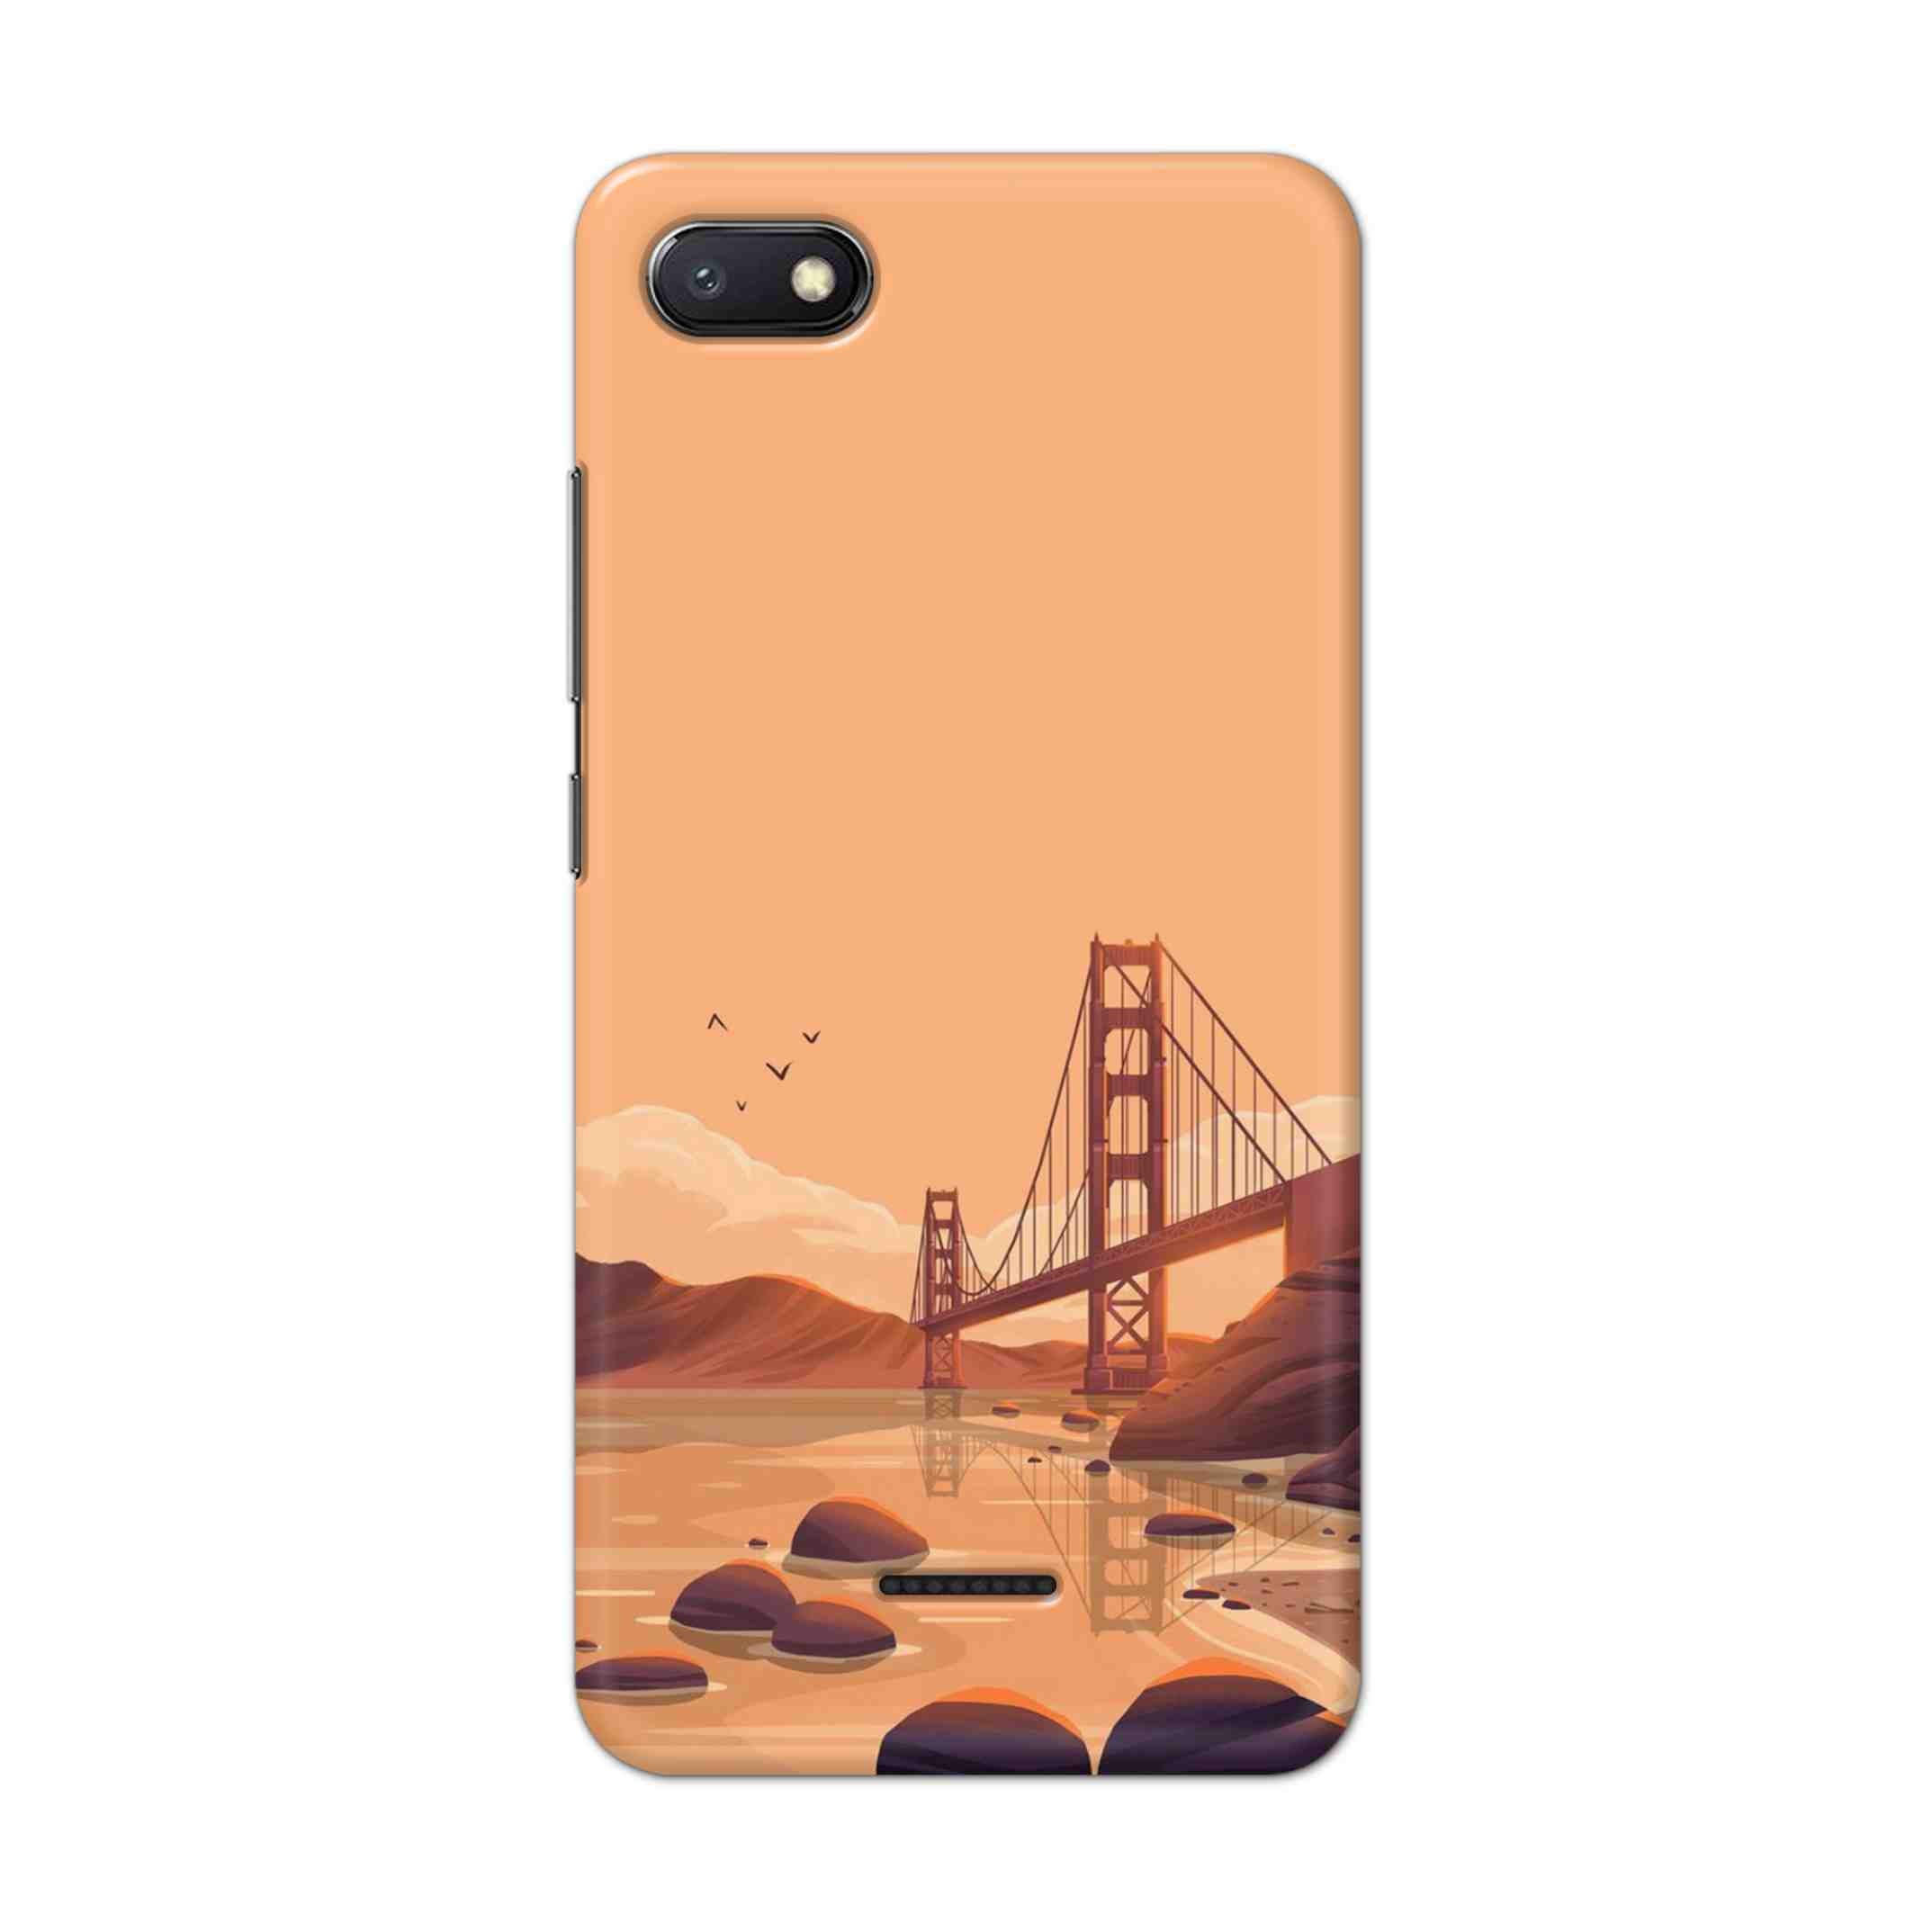 Buy San Fransisco Hard Back Mobile Phone Case/Cover For Xiaomi Redmi 6A Online